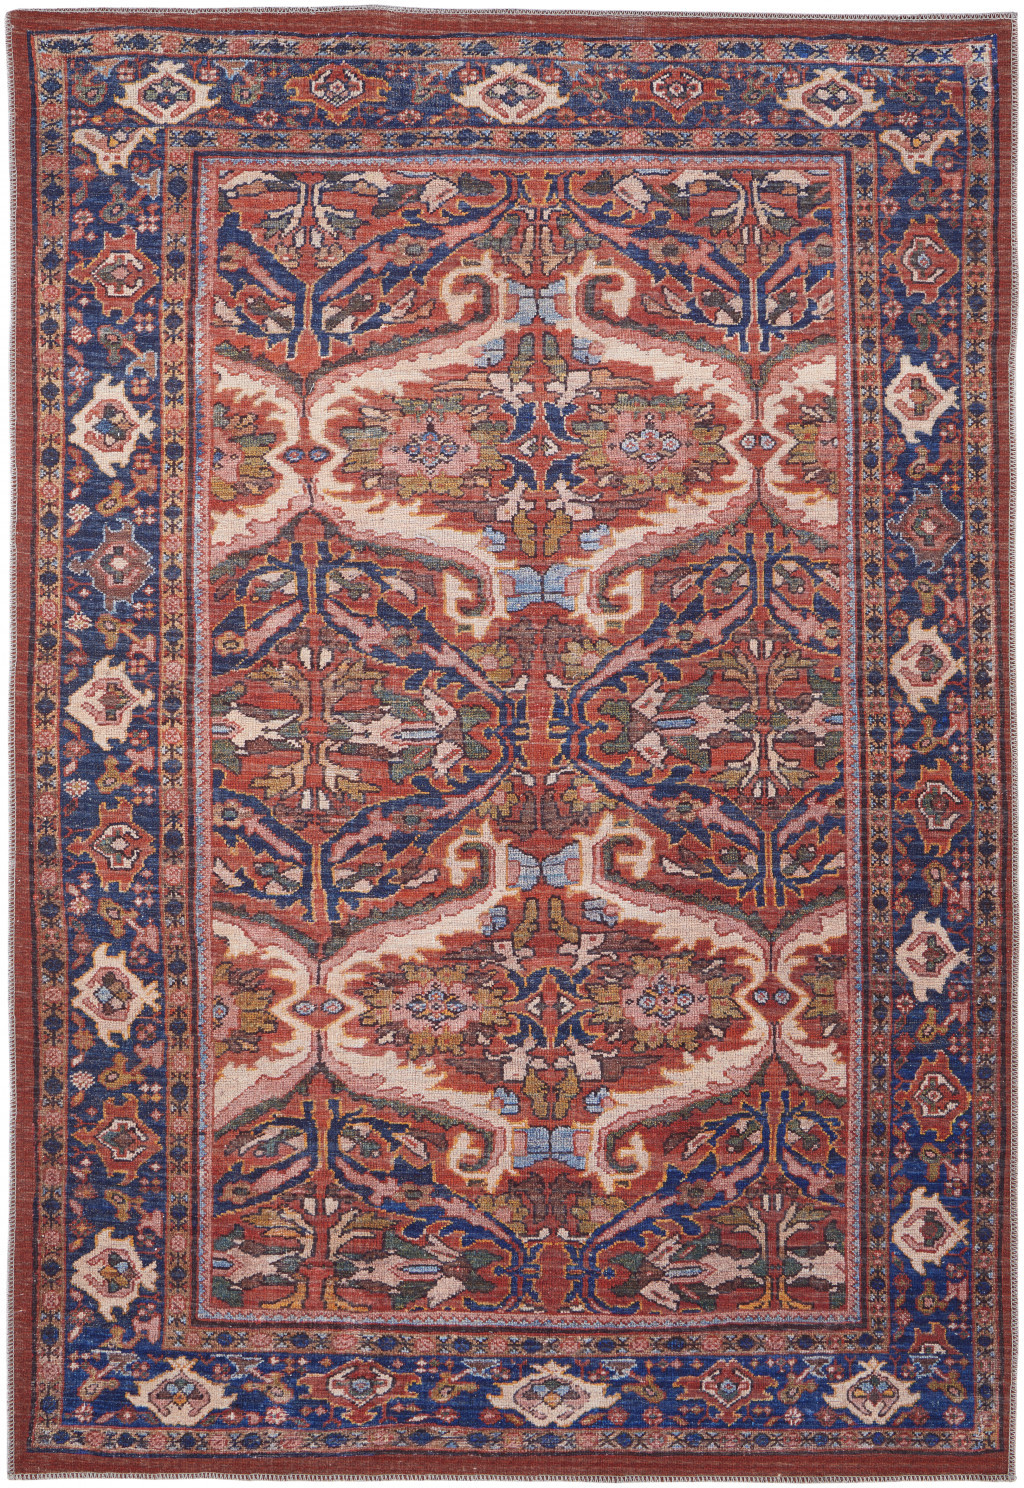 10' X 14' Red Tan And Blue Floral Power Loom Area Rug-515151-1